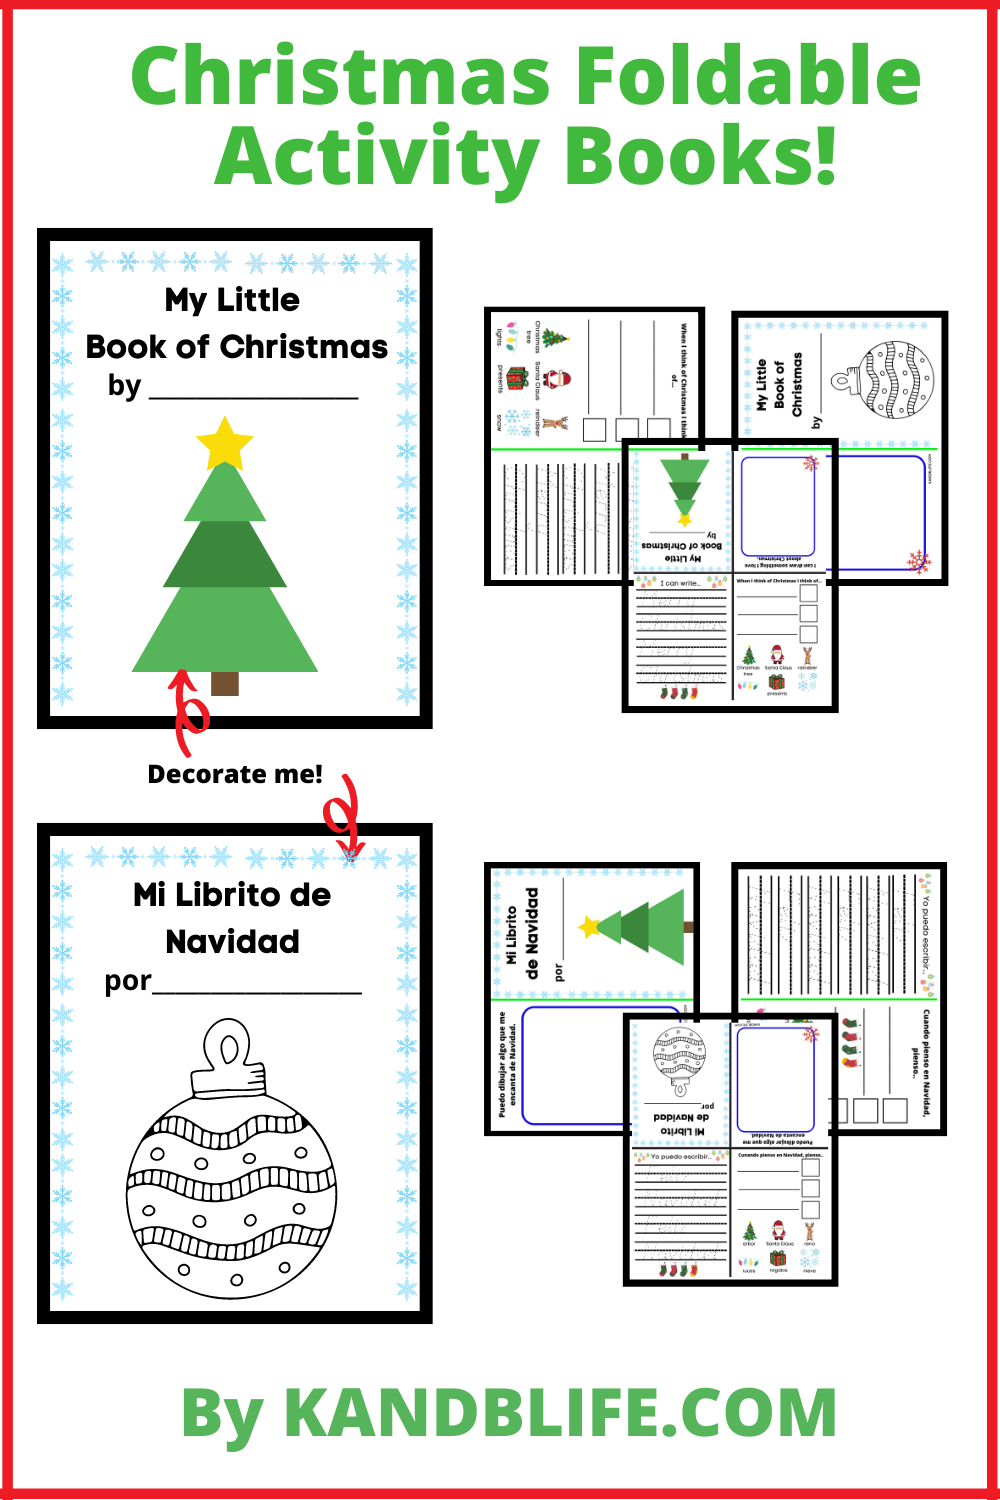 Christmas Activity Foldable Booklet.